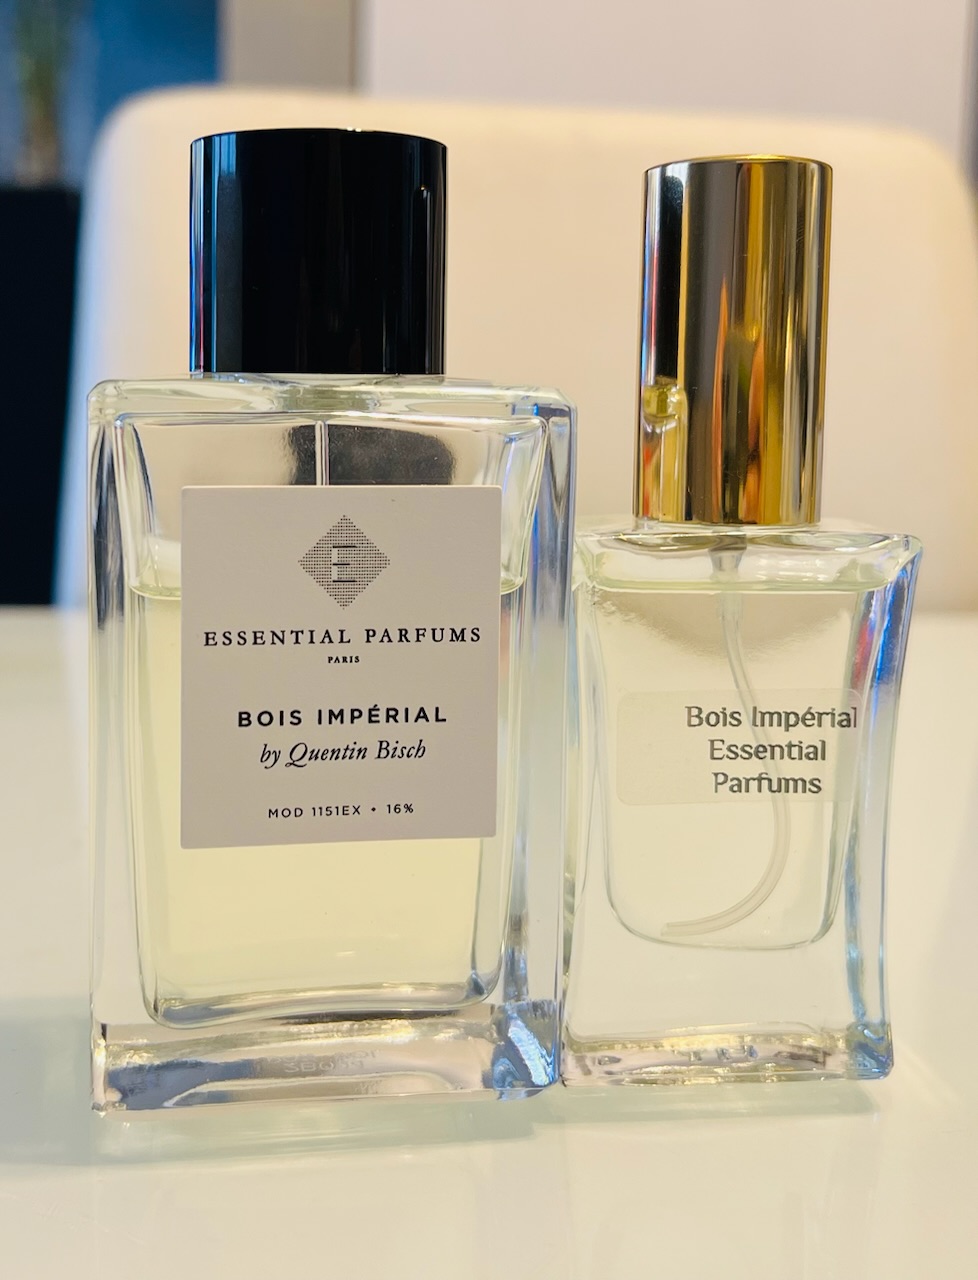 Essential parfums bois imperial оригинал. Essential Parfums bois Imperial. Essential Parfums bois Imperial 10 ml. Essential Parfums Paris bois Imperial by Quentin bisch. Essential Parfums bois Imperial 25 мл.